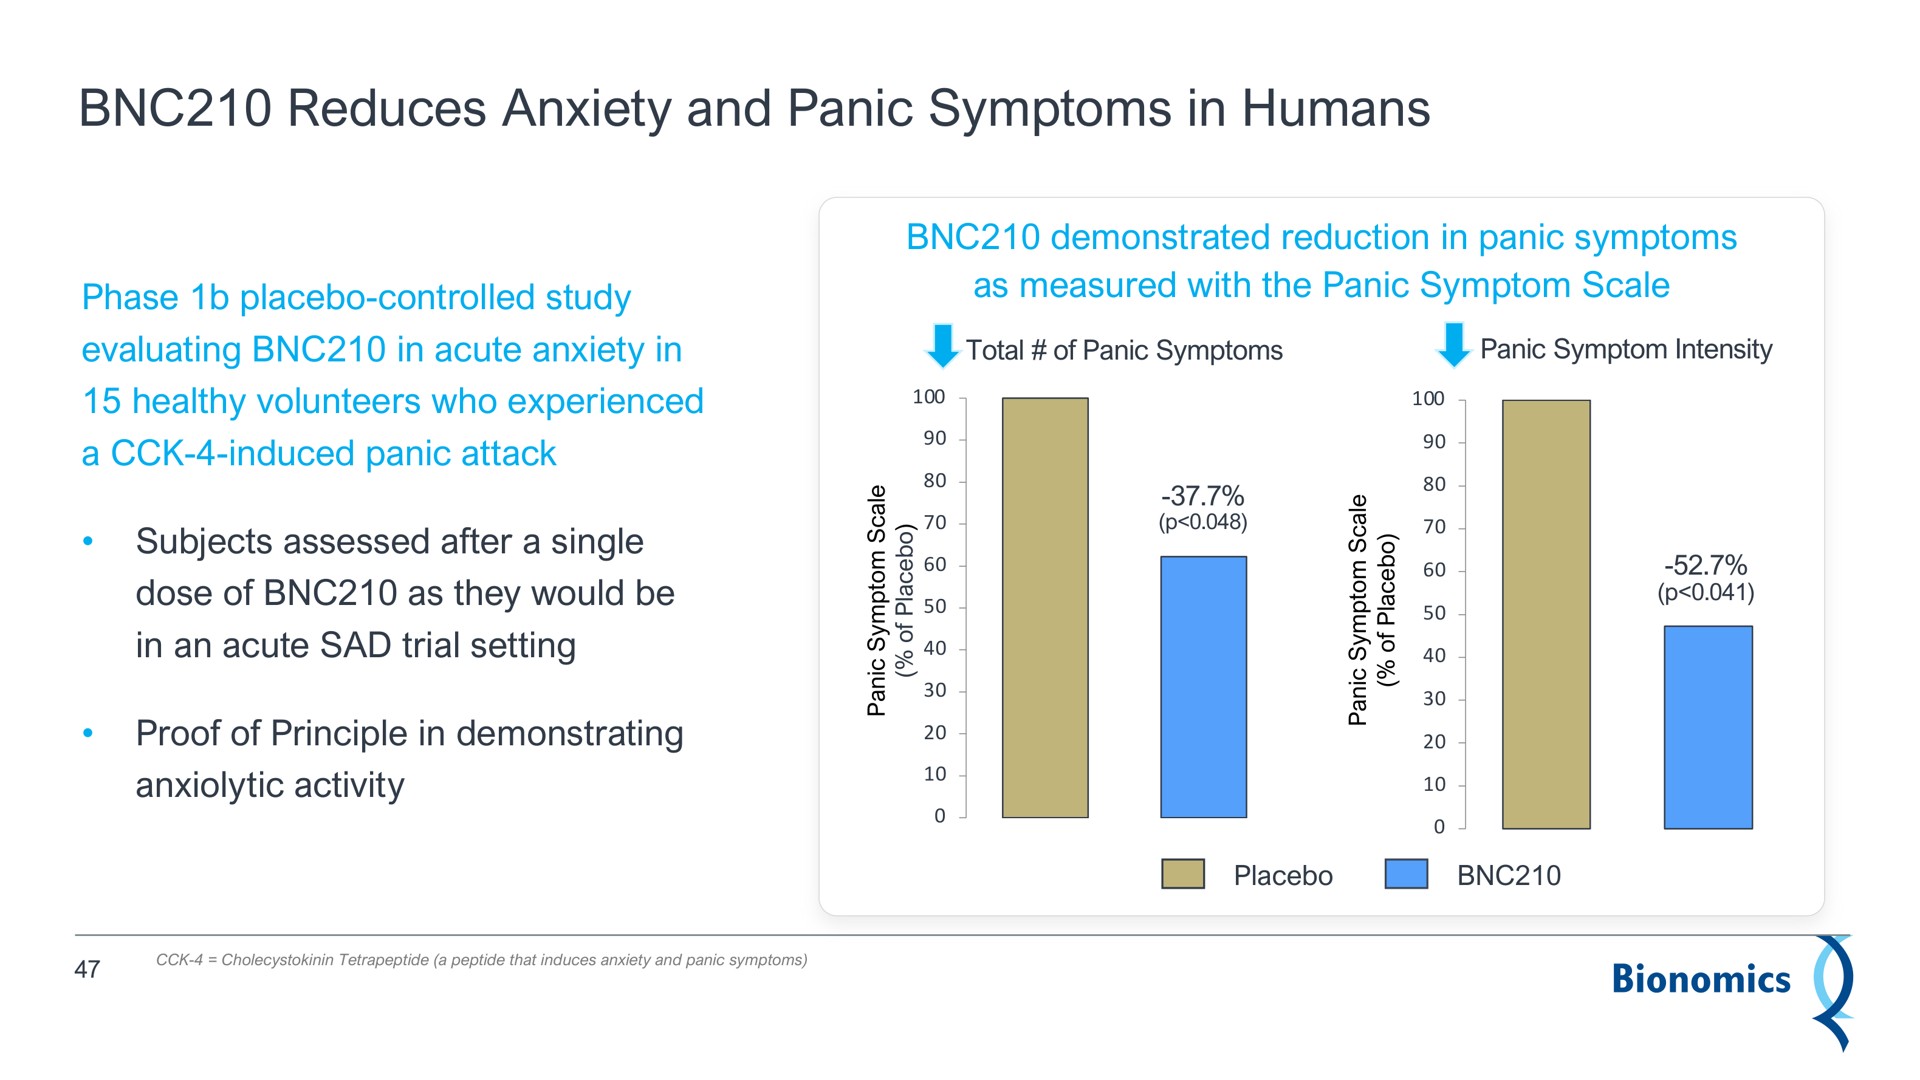 reduces anxiety and panic symptoms in humans | Bionomics